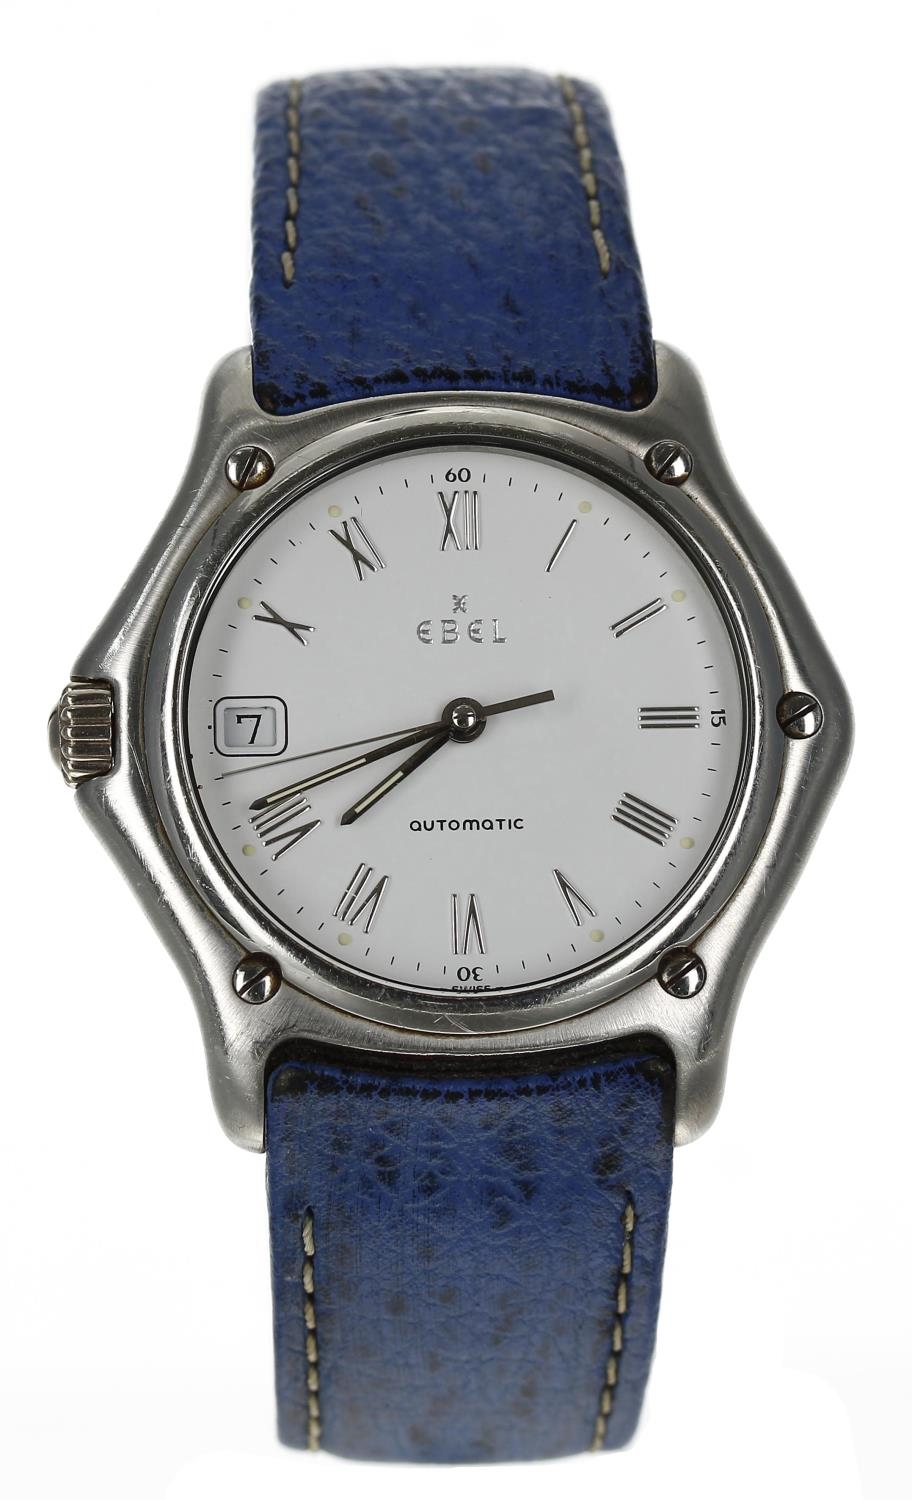 Ebel 1911 automatic 'right hand' stainless steel gentleman's wristwatch, reference no. 75503513,